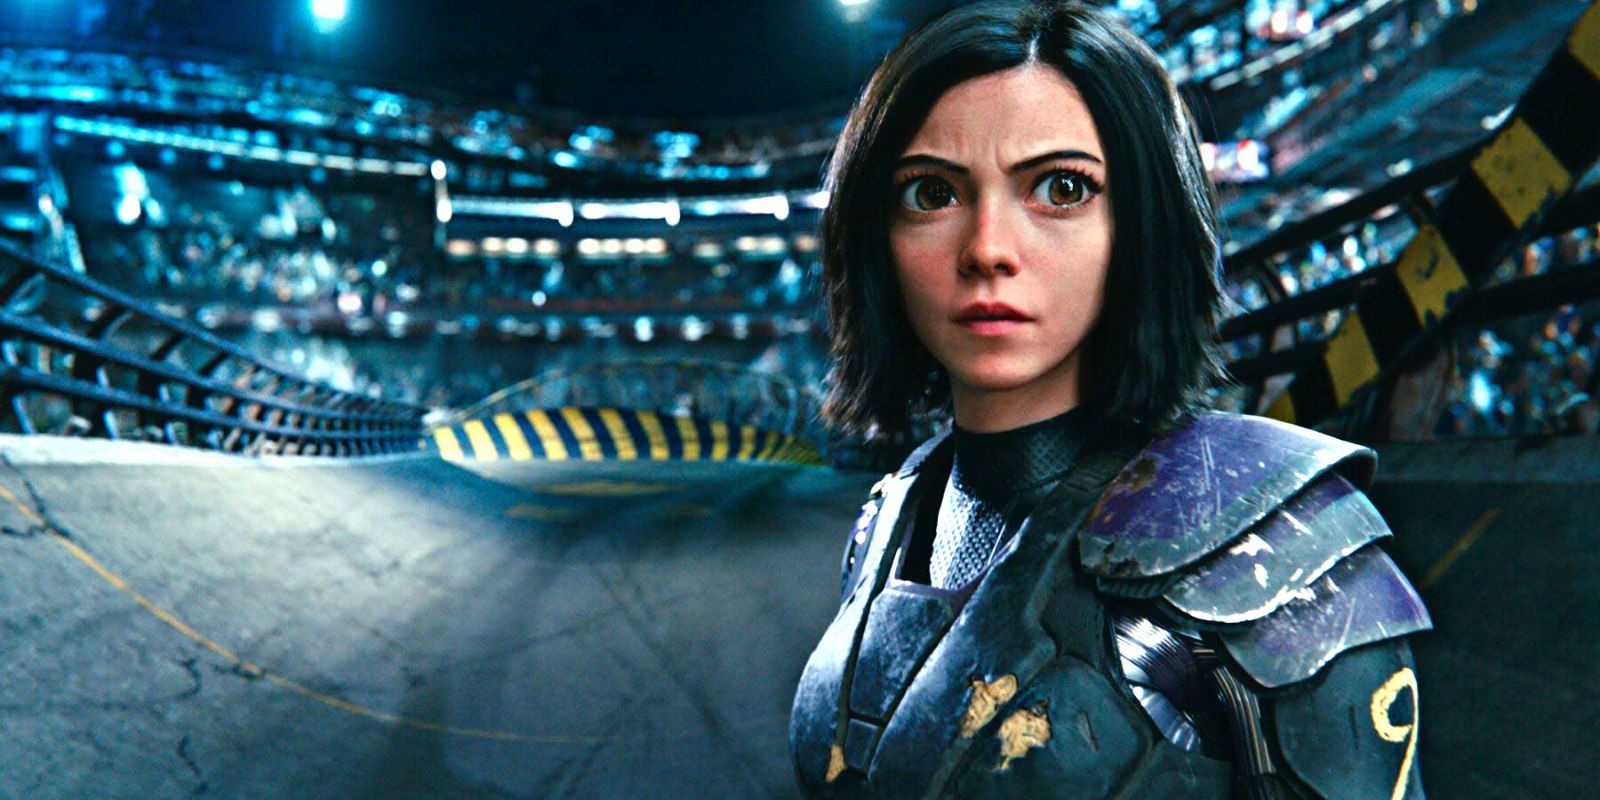 Alita concentrates while standing in a metal arena, surrounded by an audience